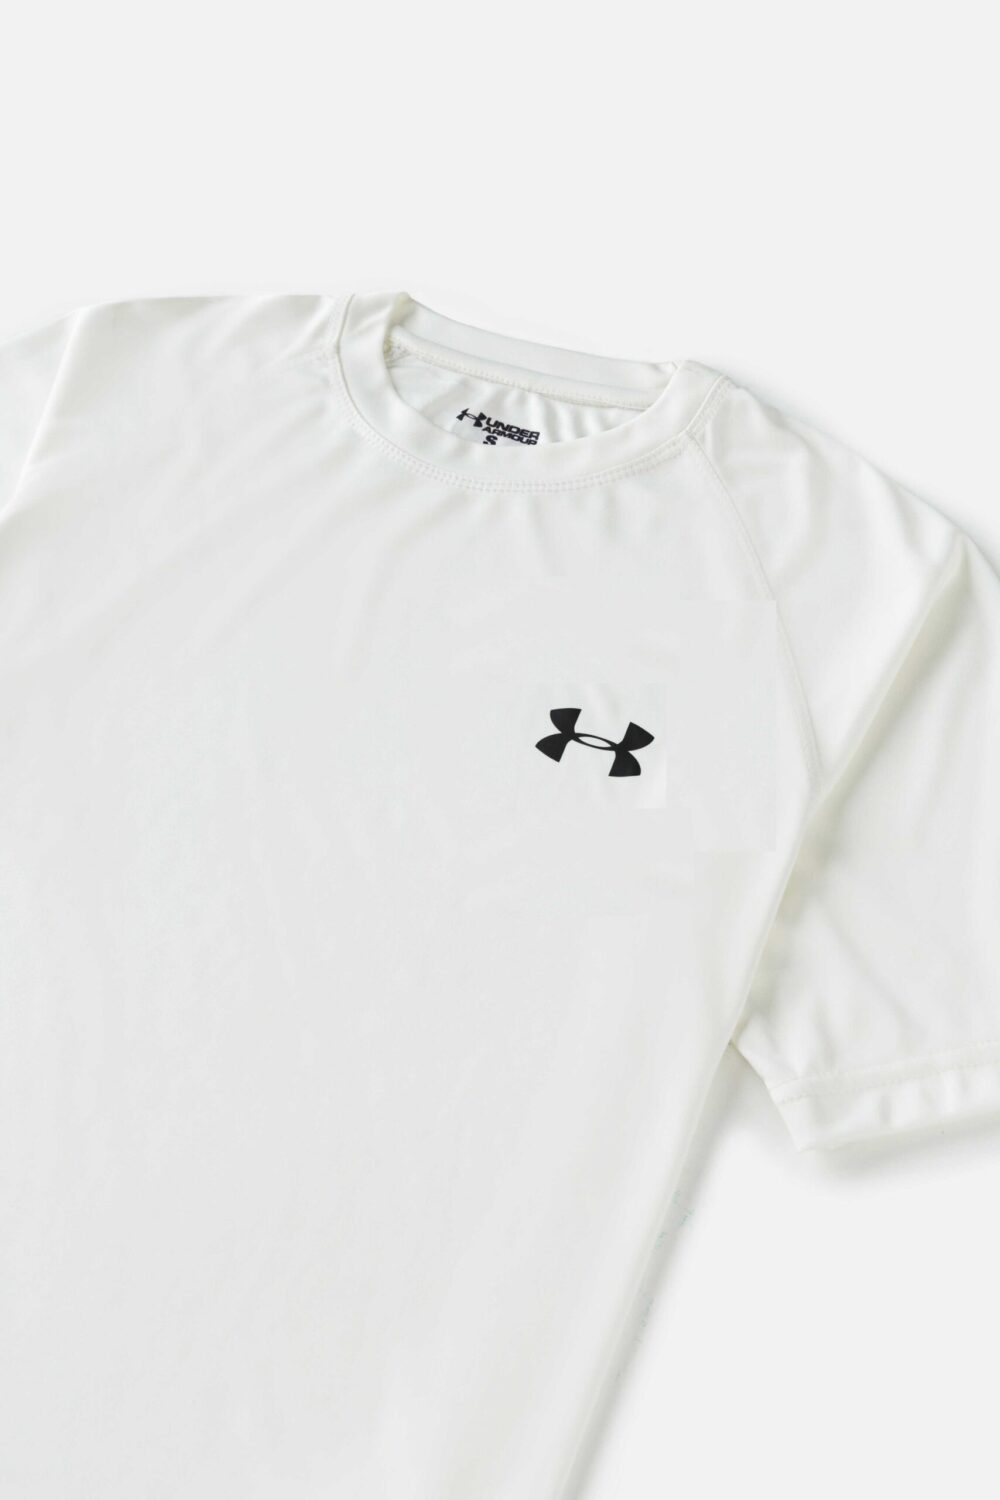 Under Armour Imported Dri-FIT T Shirt – White